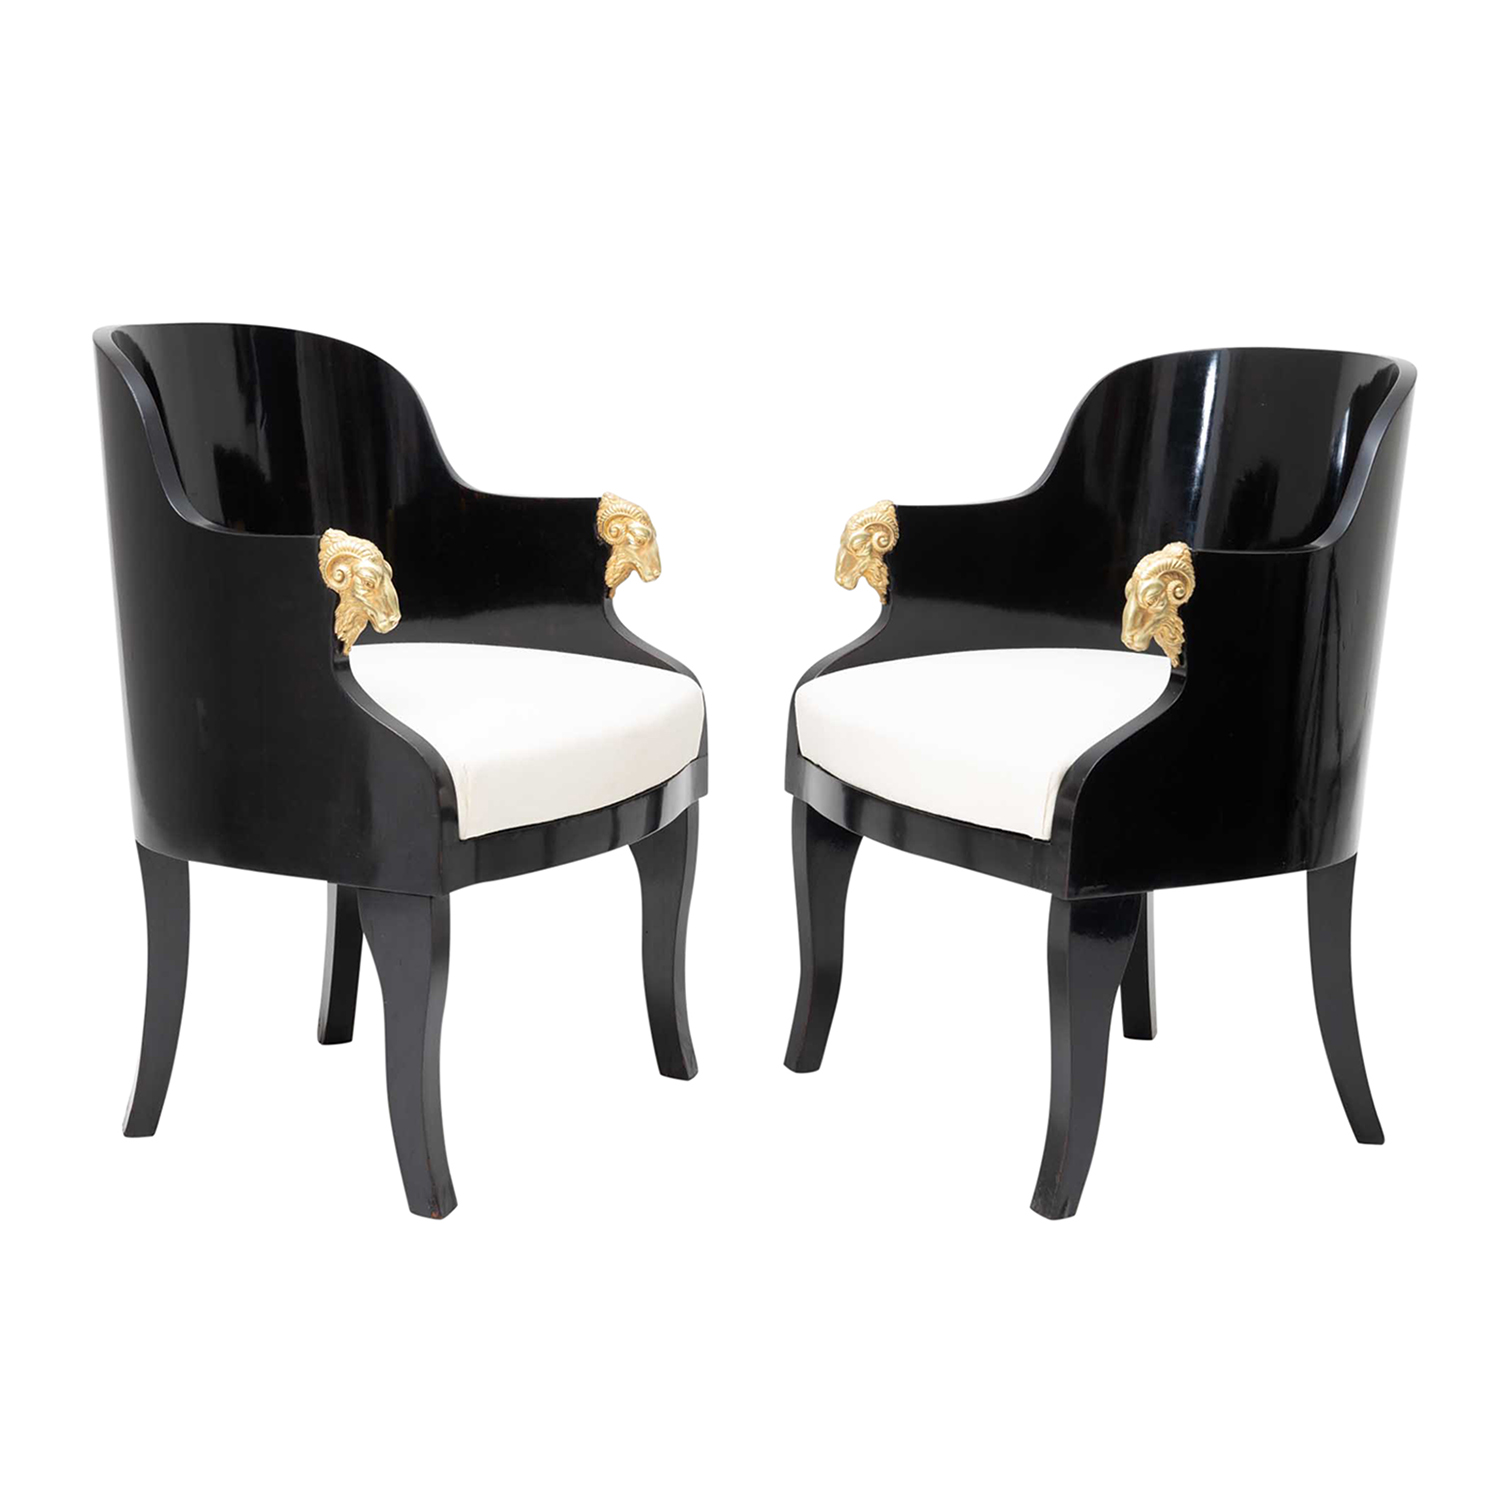 19th Century Black Baltic Pair of Lacquered Birch Armchairs – Antique Side Chairs